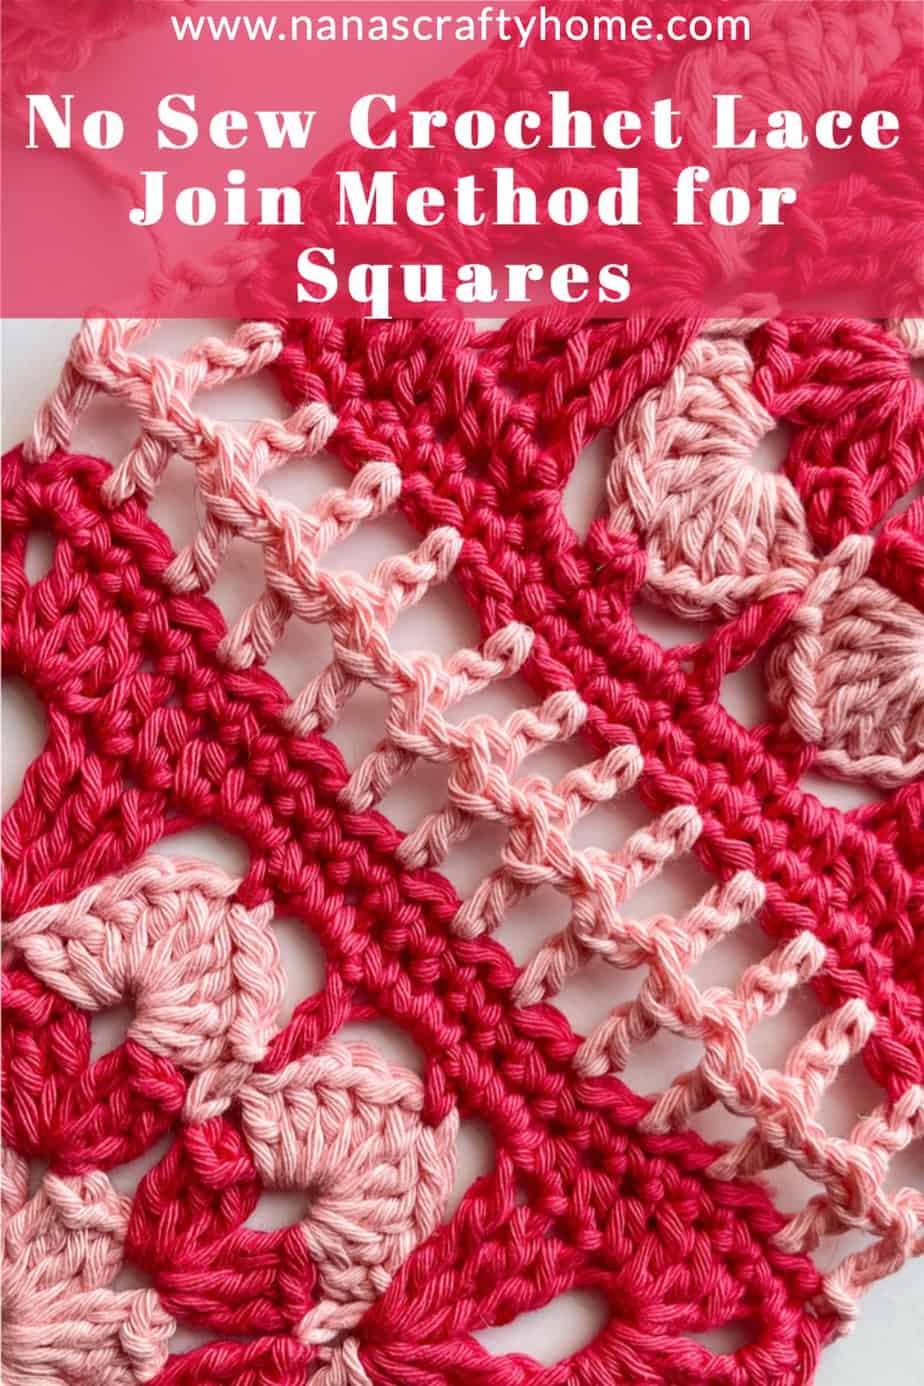 Lace Crochet Join Squares Tutorial for crochet squares